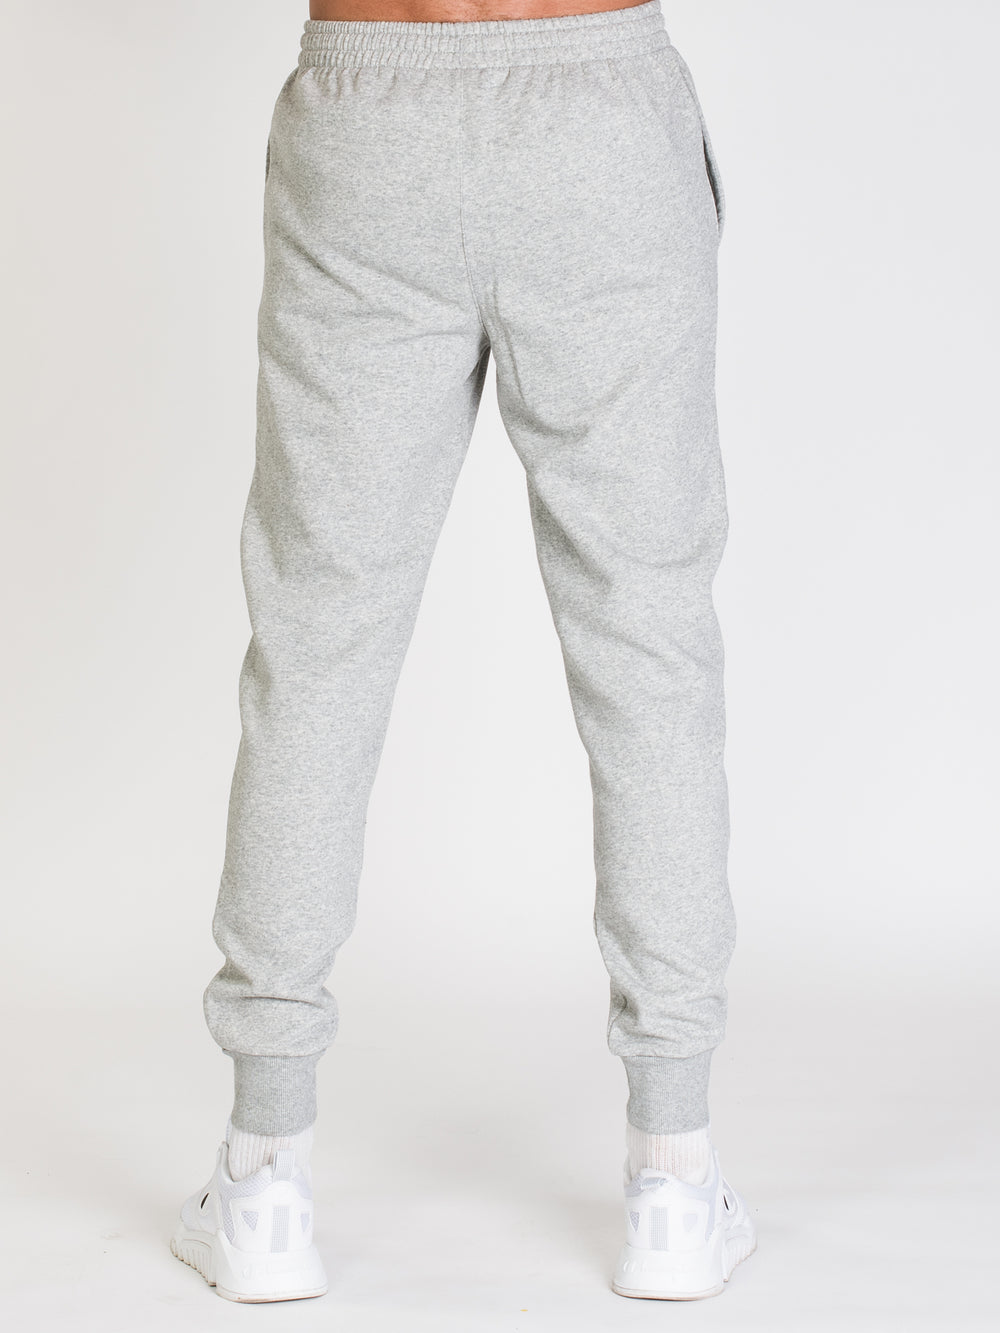 CHAMPION POWERBLEND GRAPHIC JOGGER  - CLEARANCE